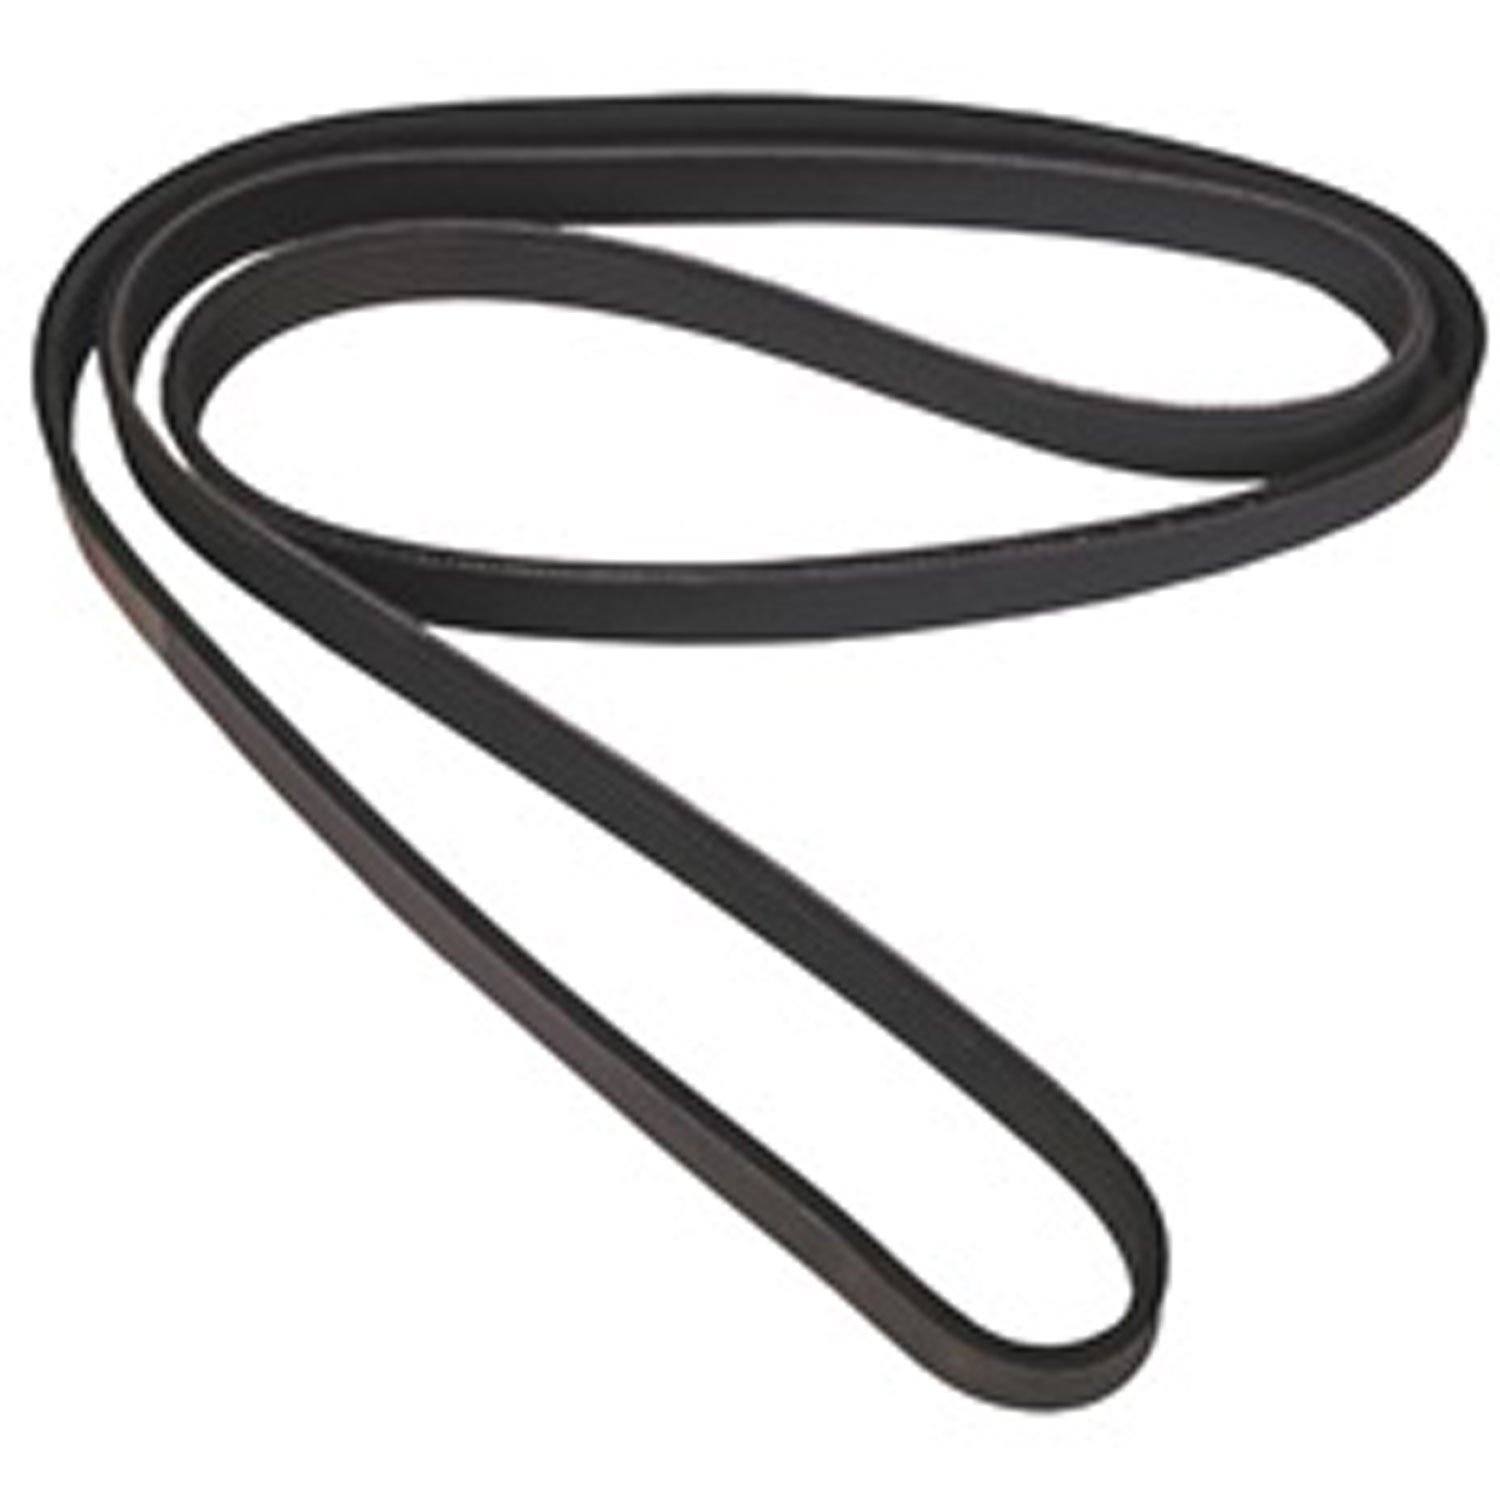 Stock replacement serpentine belt from Omix-ADA, Fits 94-95 Jeep Grand Cherokees with 4.0 li